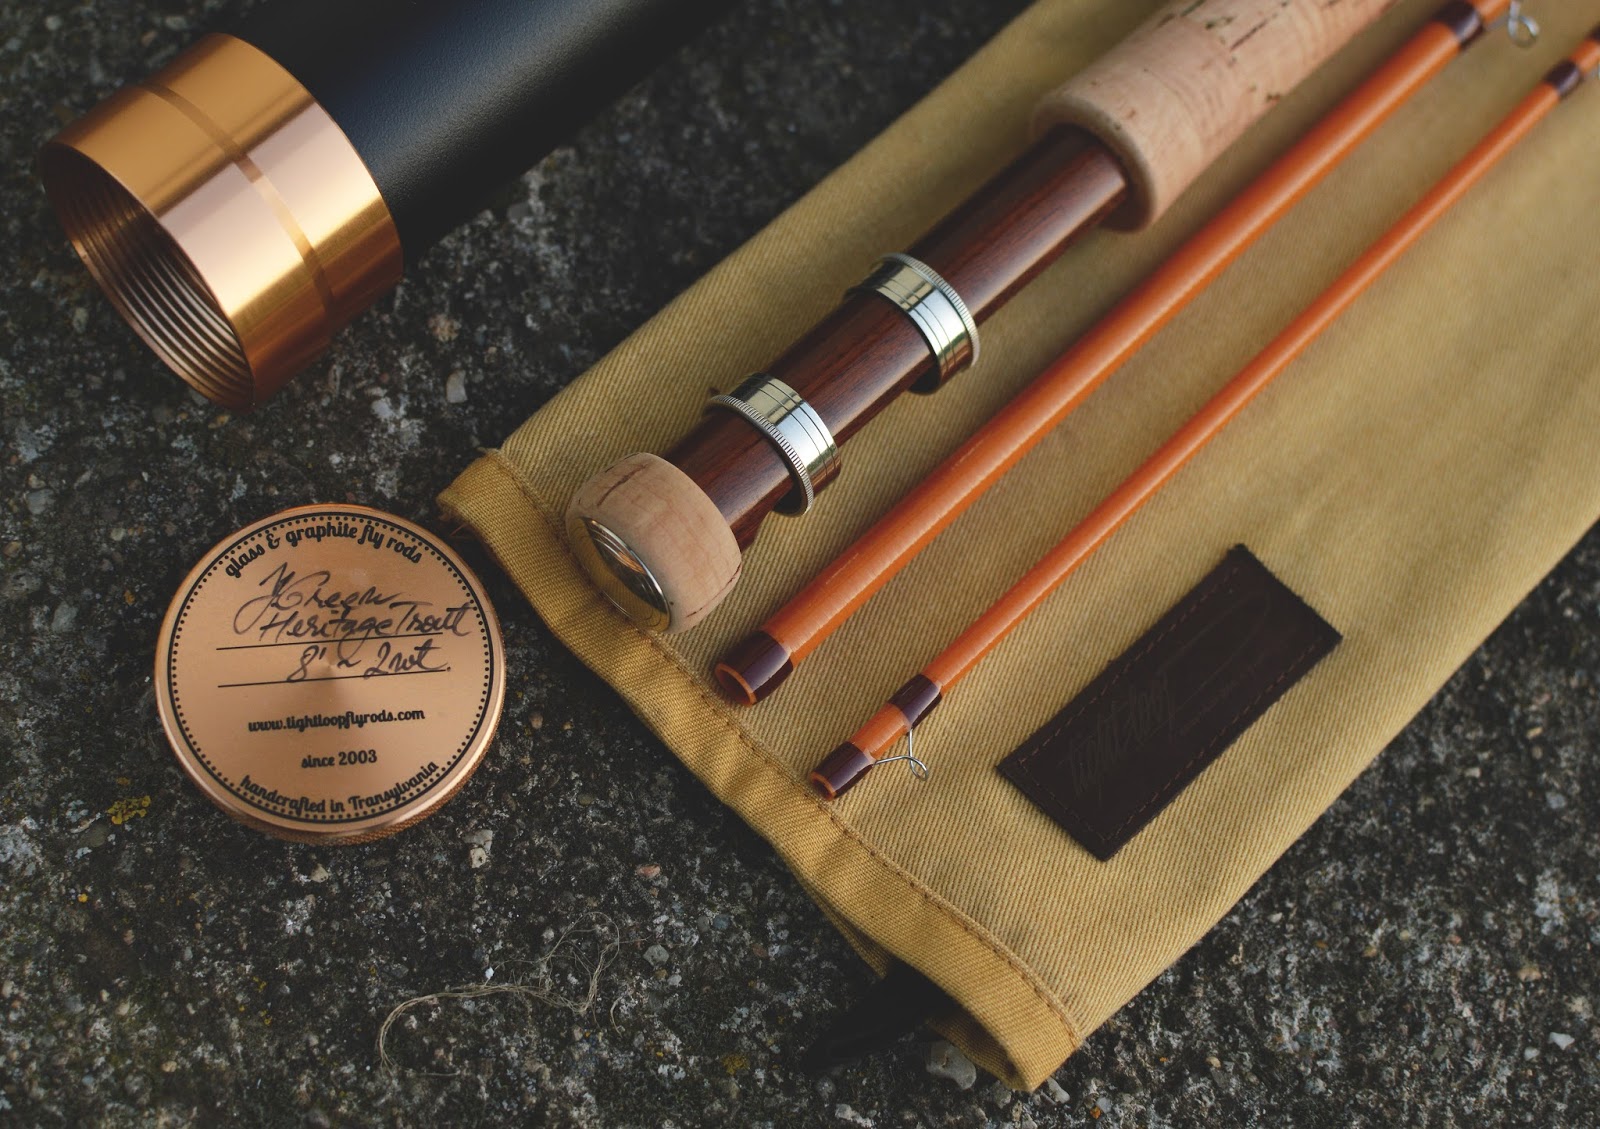 Handcrafted graphite and fiberglass fly rods: James Green glass